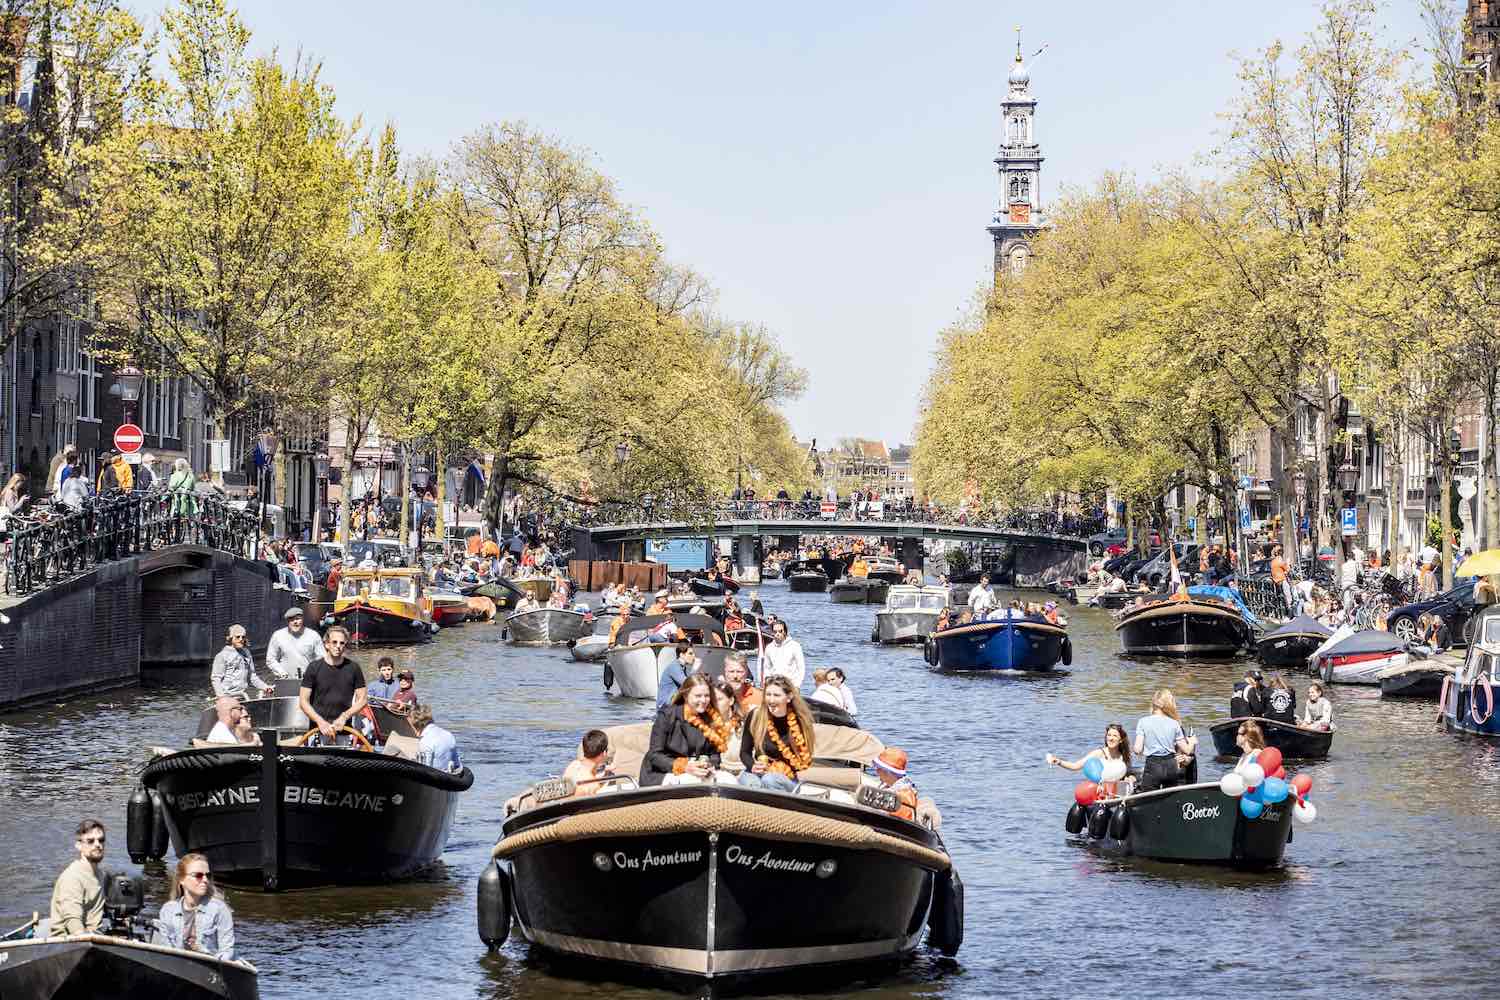 The annual "King's Day" boat parade through the canals of Amsterdam in the Netherlands.